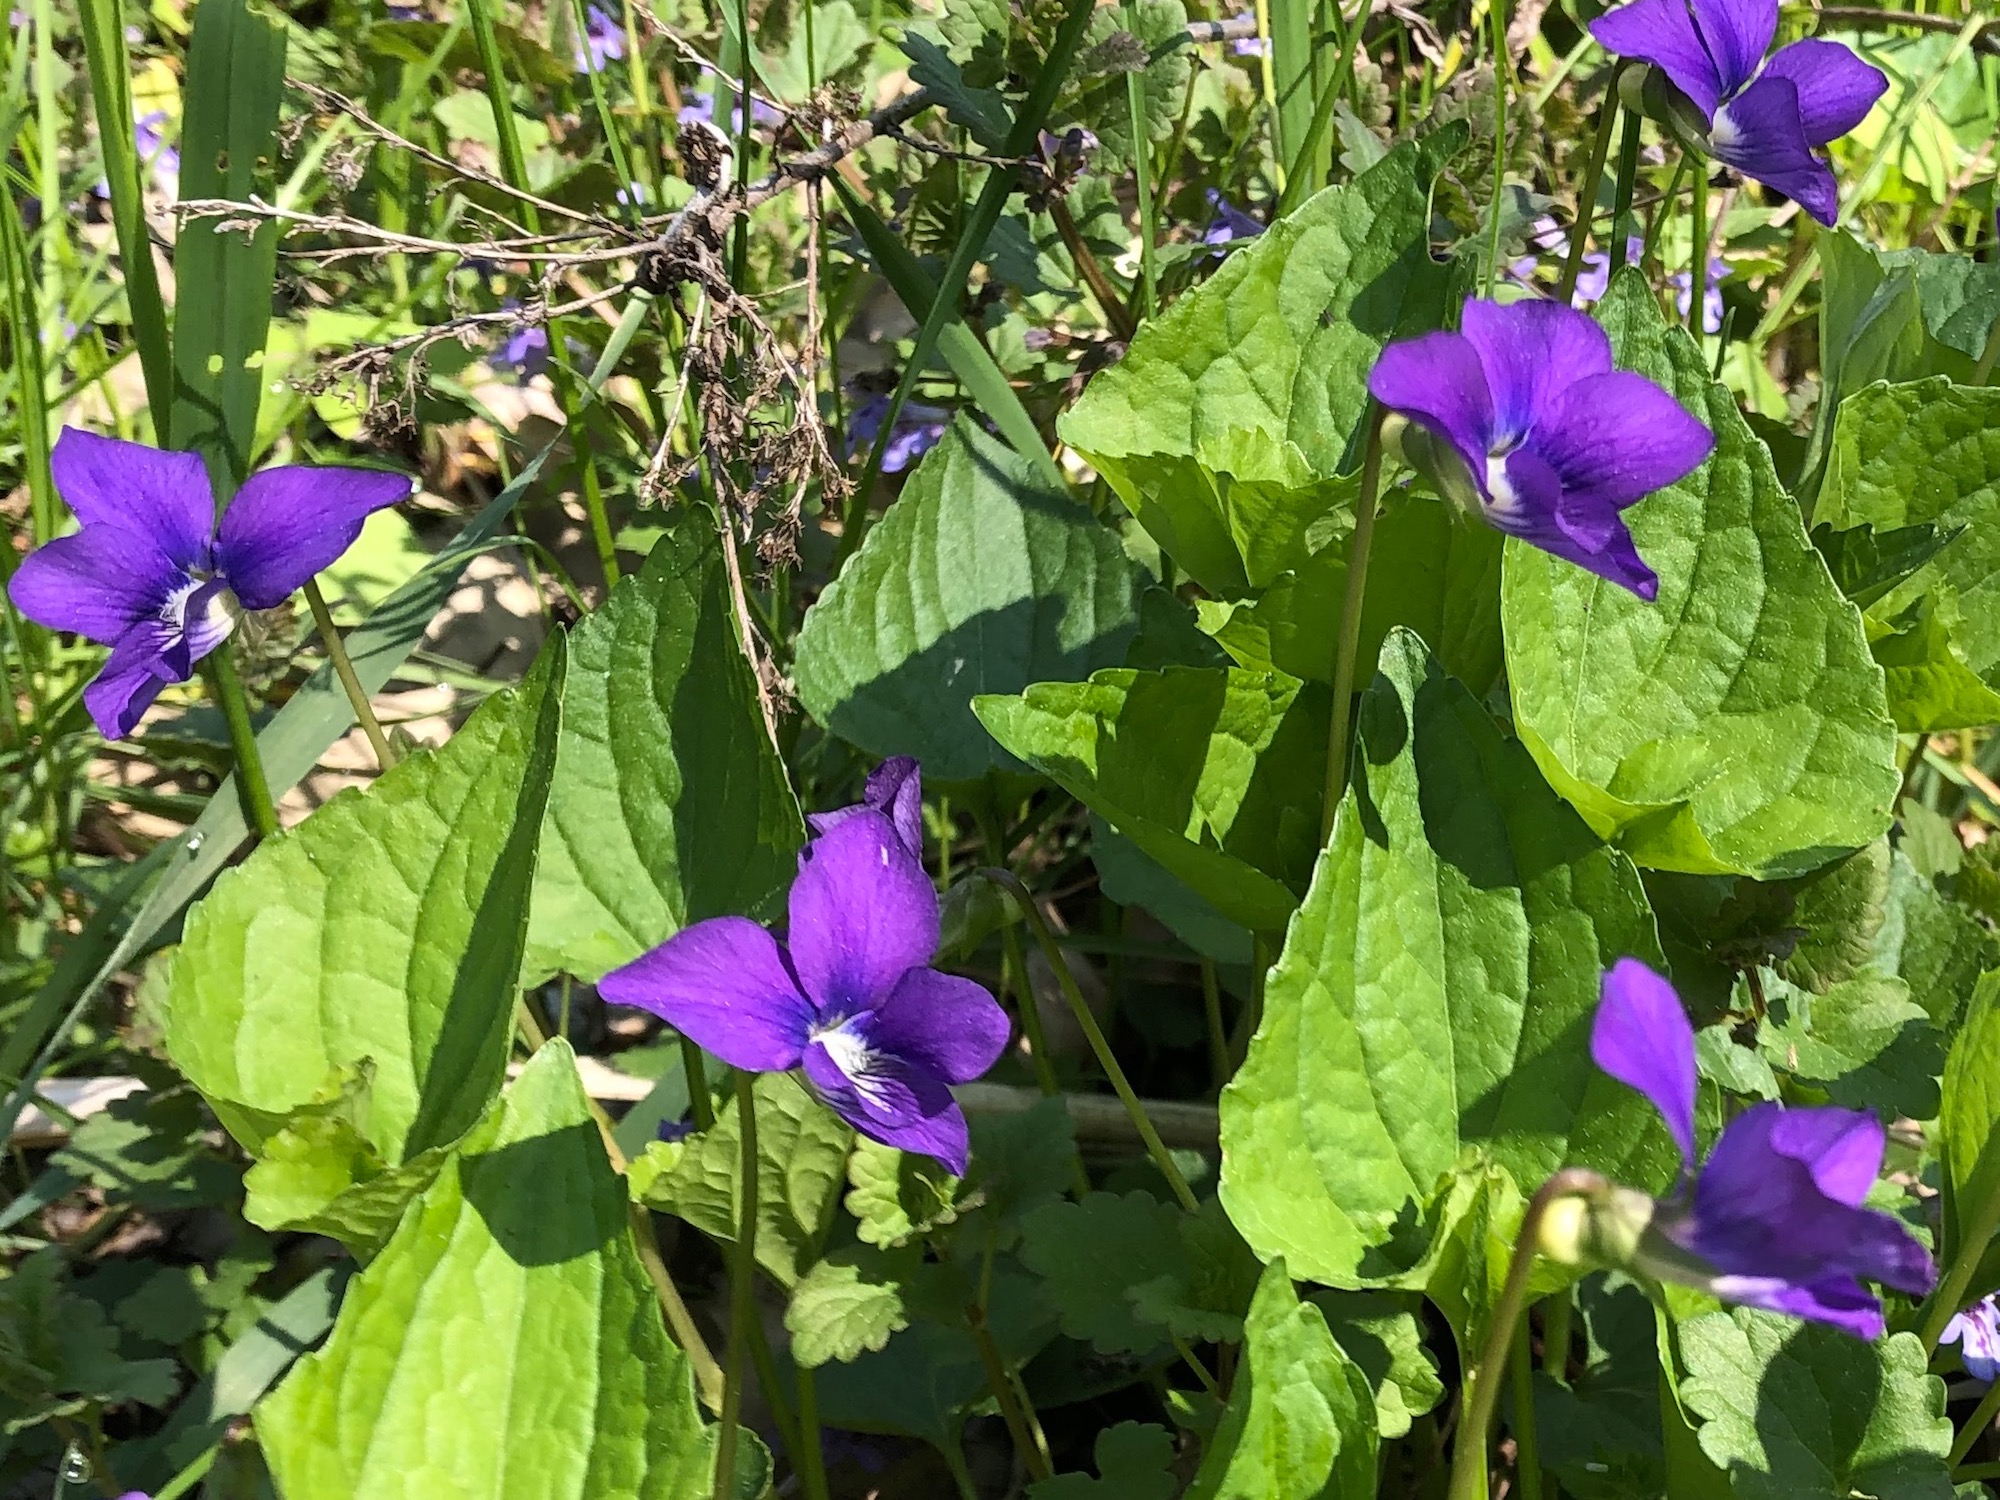 Wood Violets near the Duck Pond on May 14, 2019.